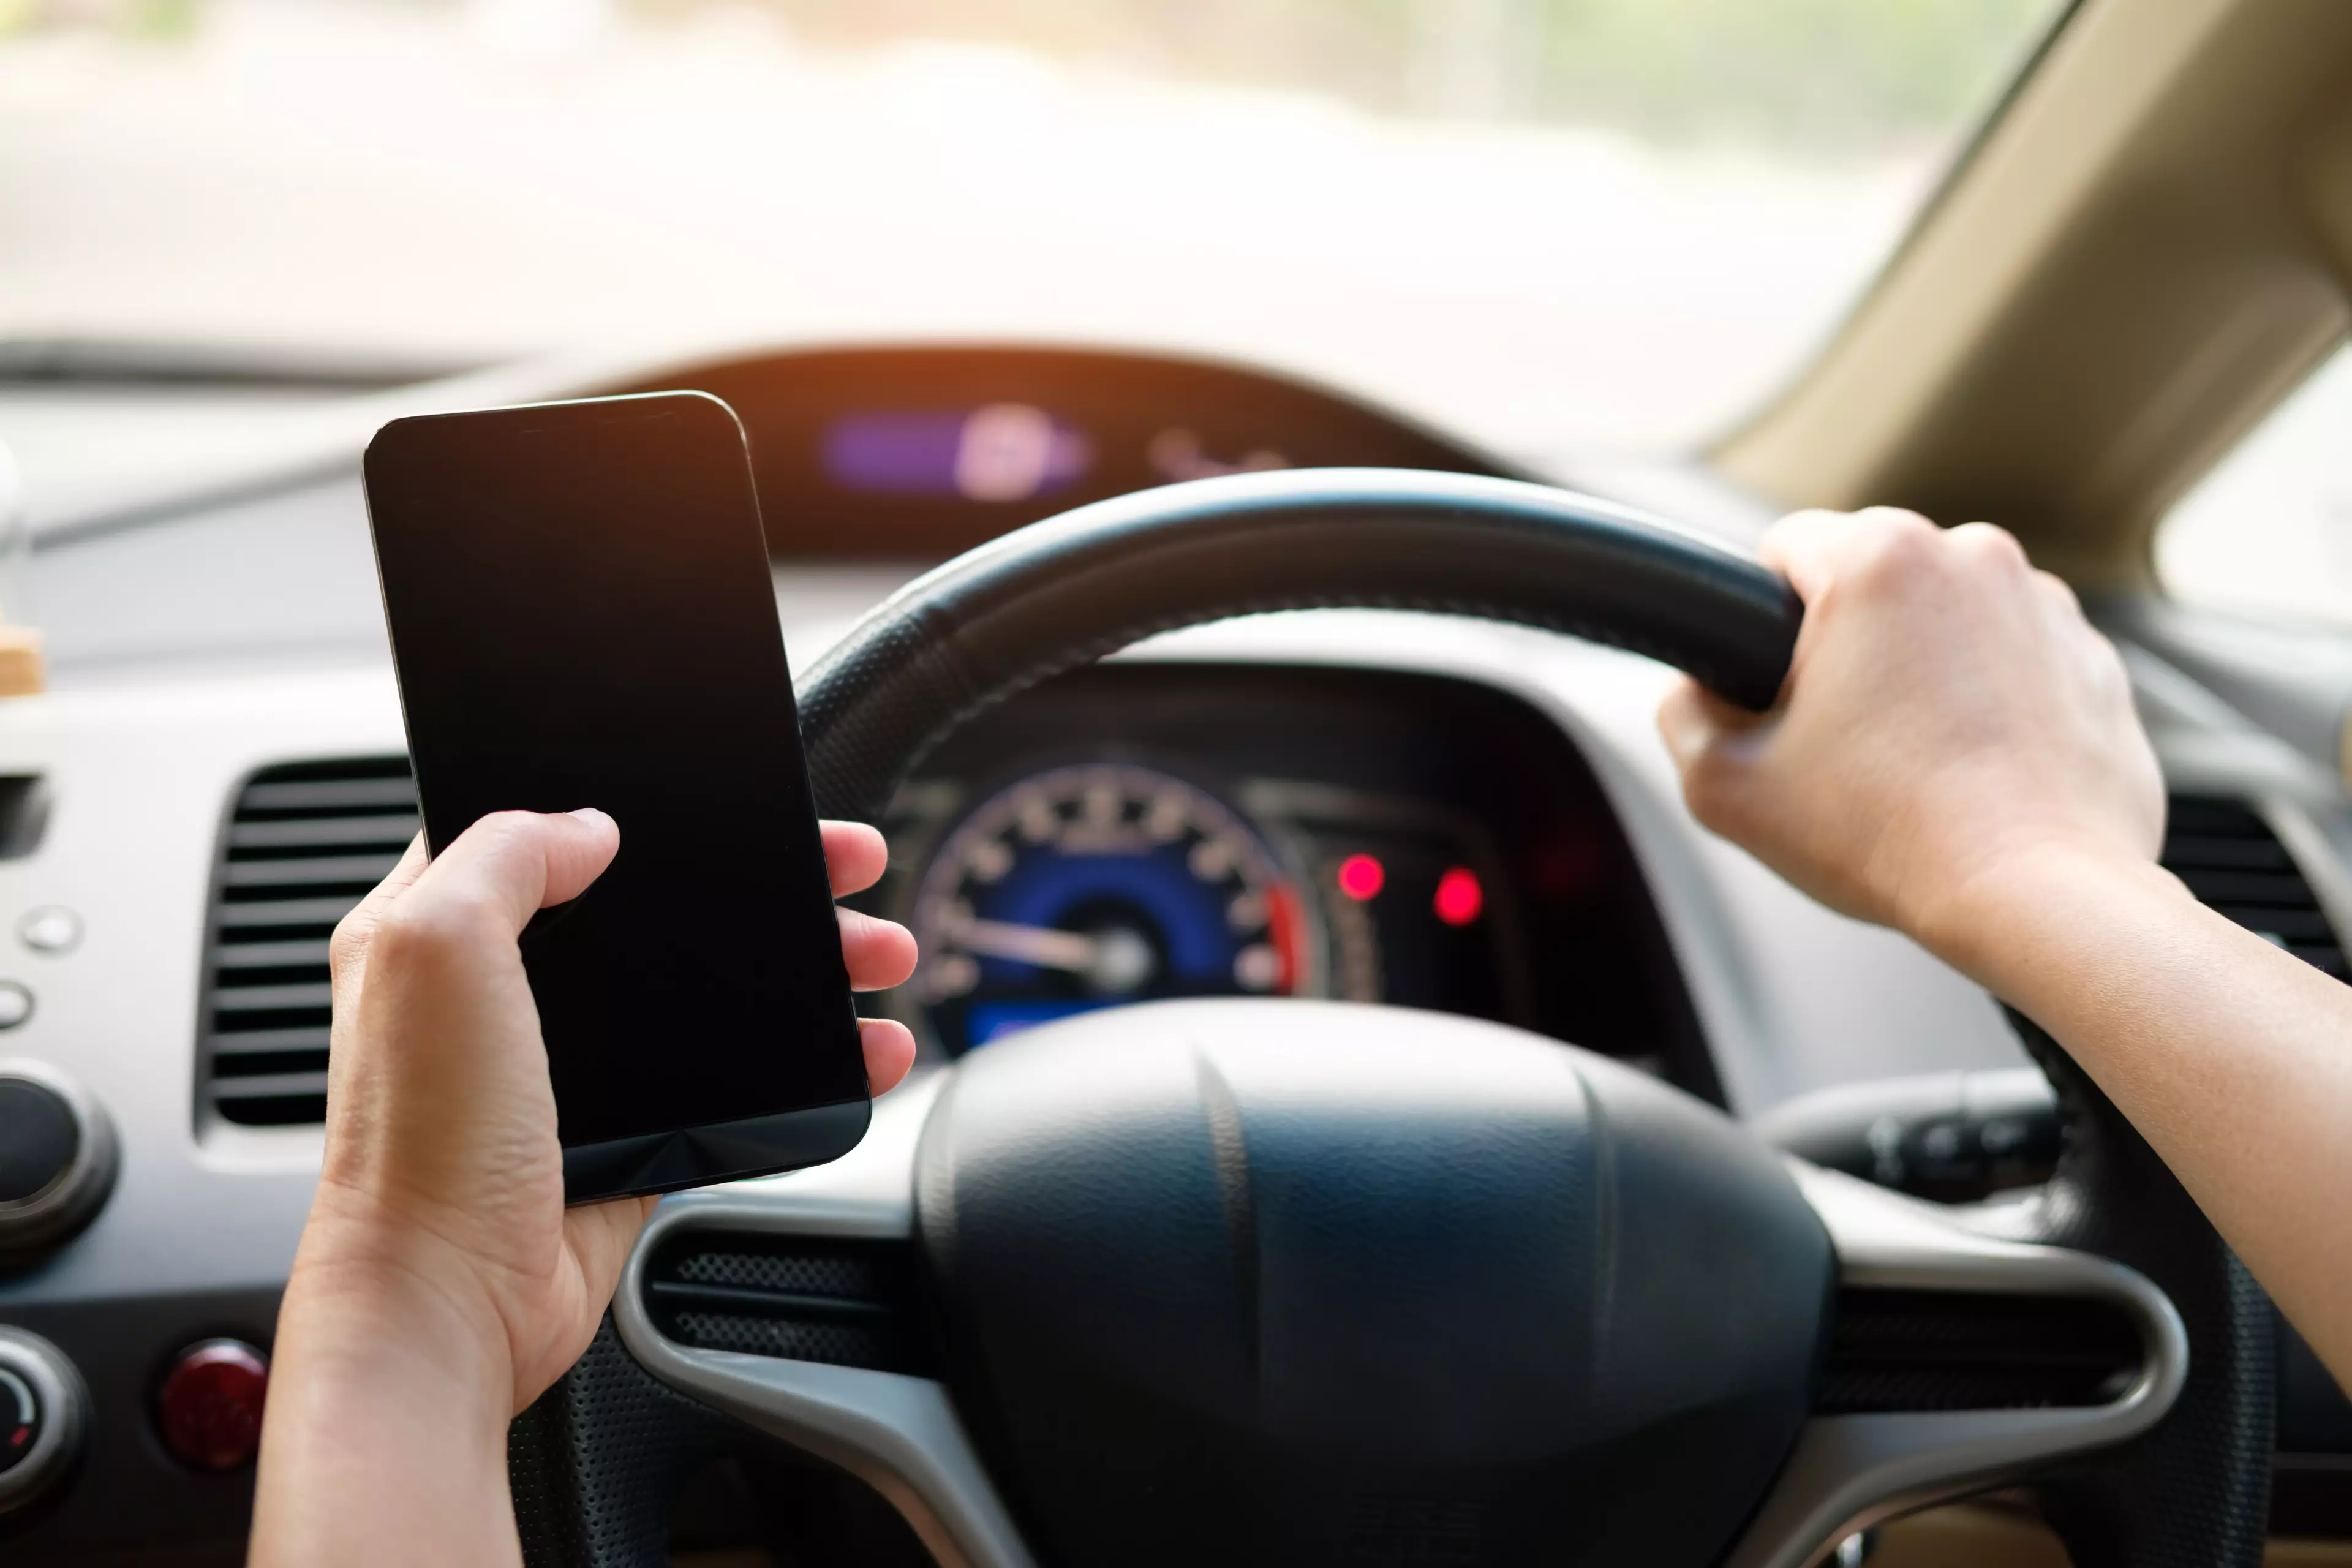 Drivers who kill someone while using a phone could be sentenced to life.